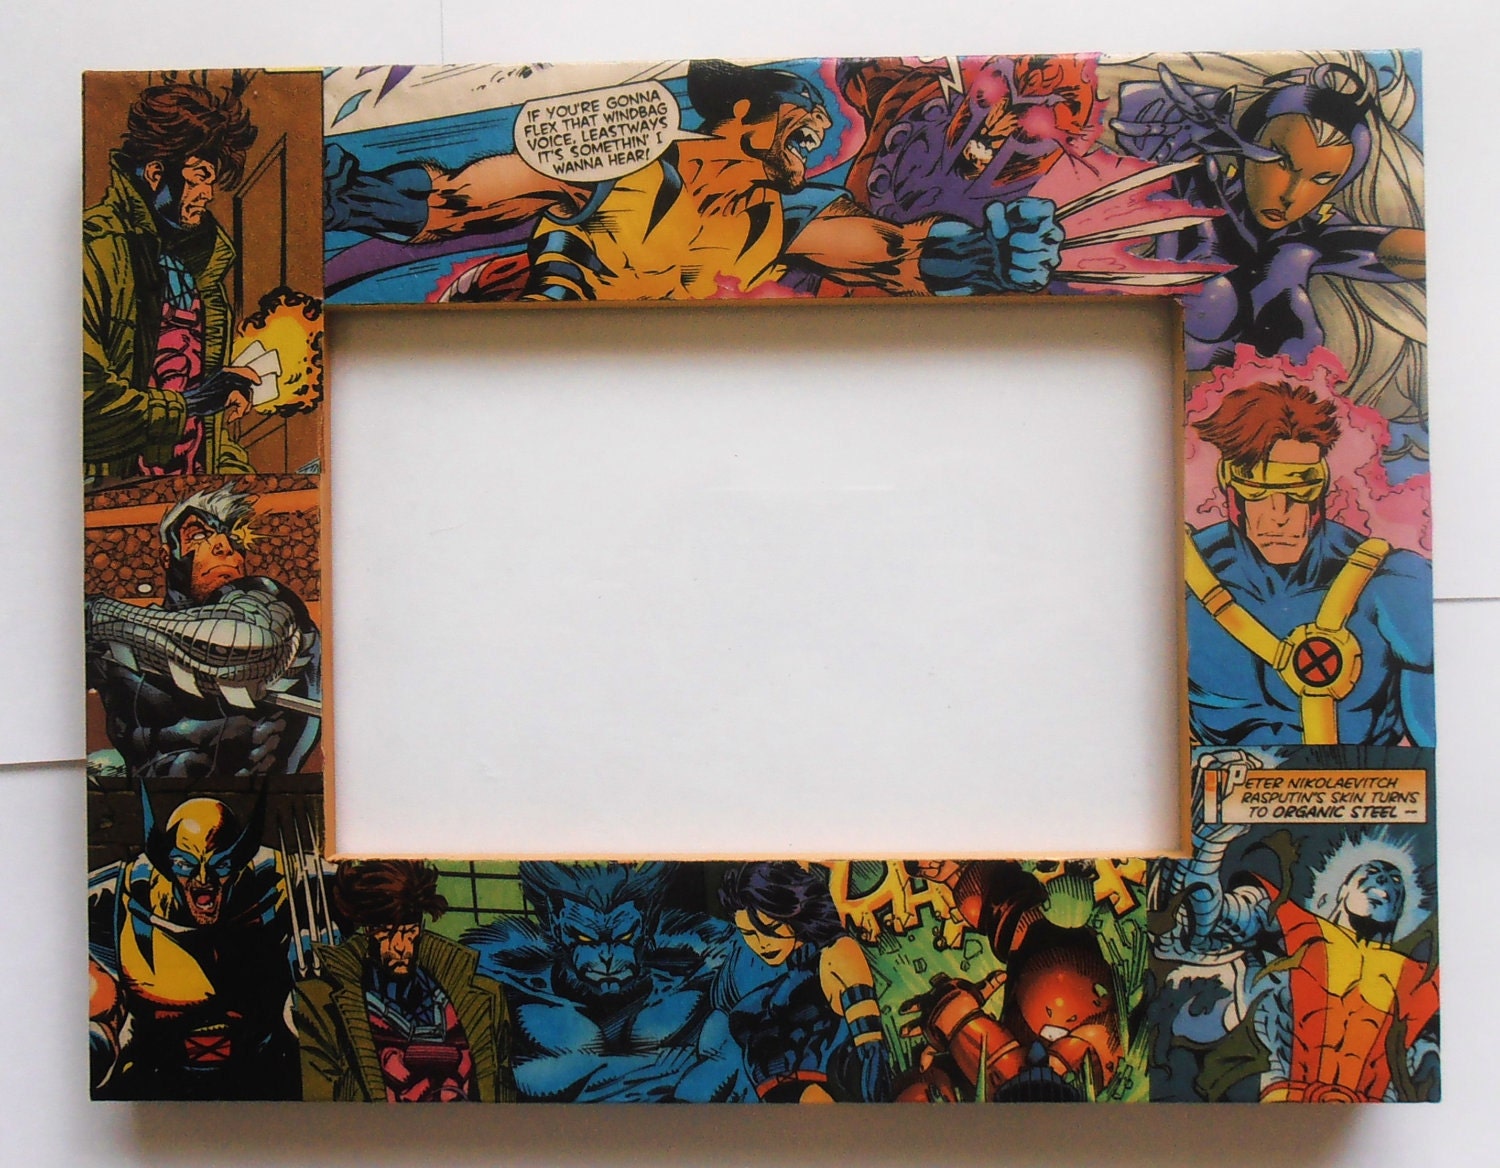 Marvel Xmen Comic Picture Frame featuring Storm Wolverine